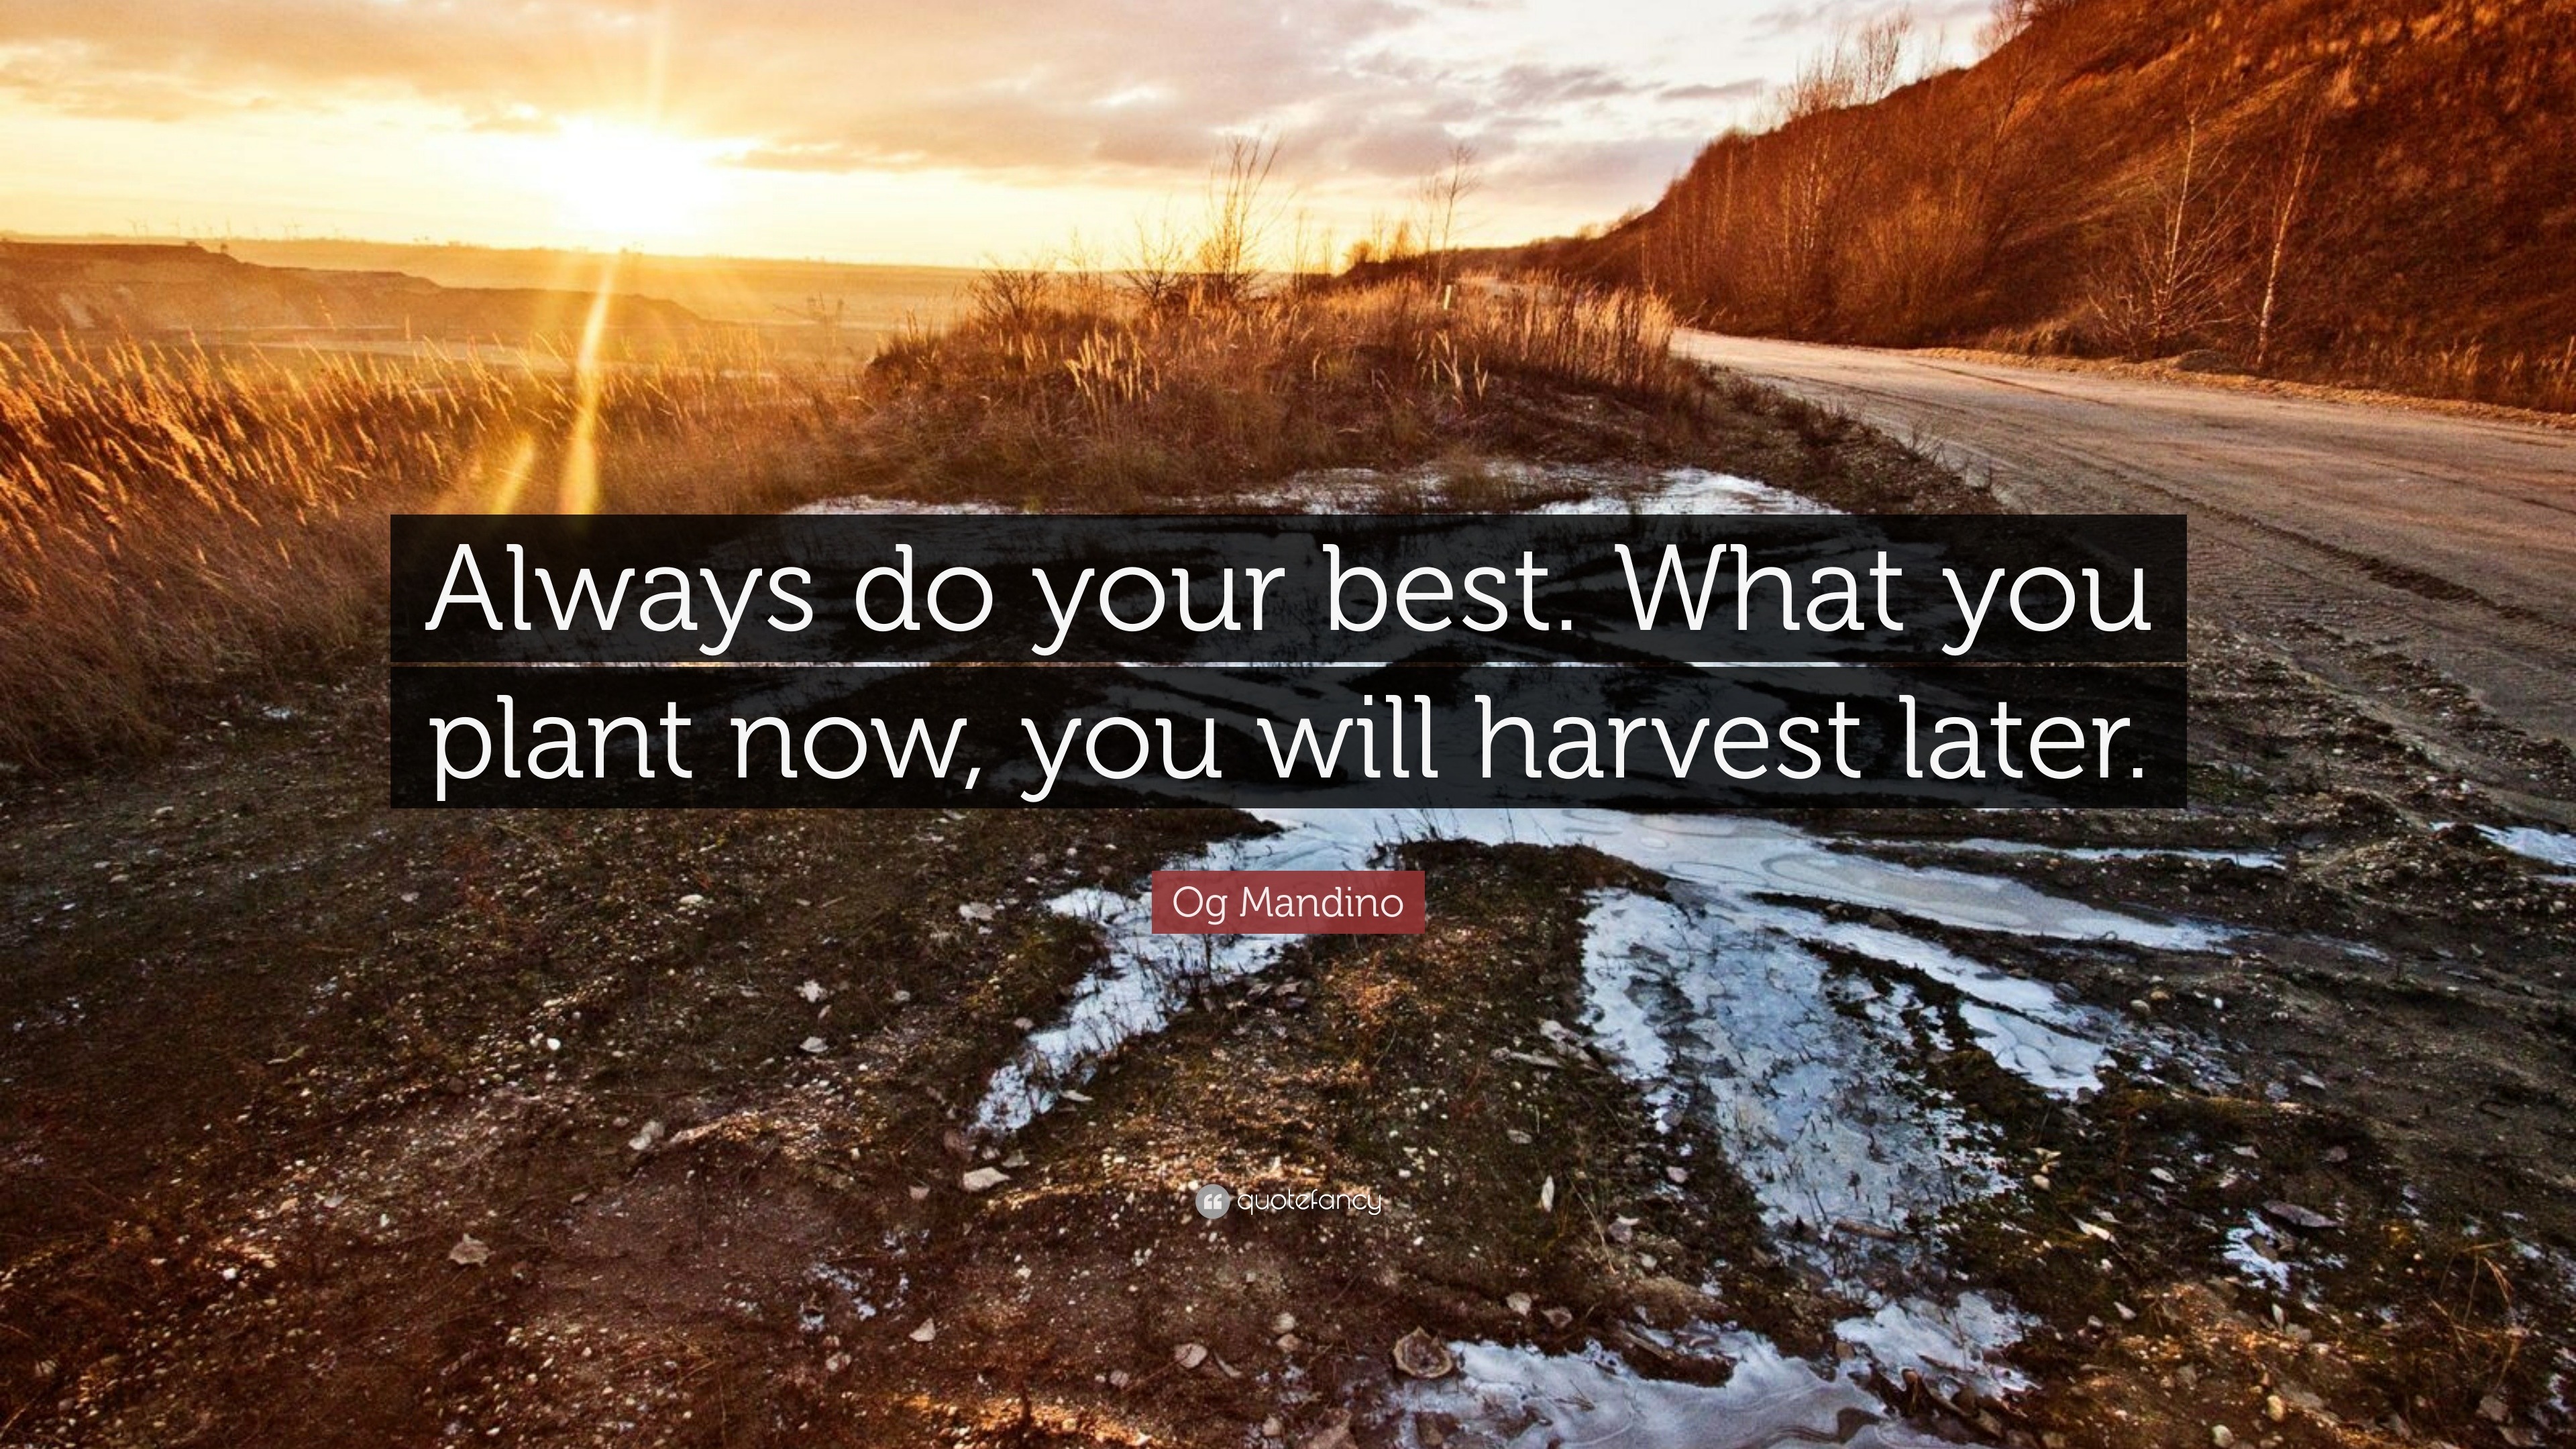 Quote Wall Decor Quote Poster Print Printable Inspirational Download Always do your best what you plant now you will harvest later